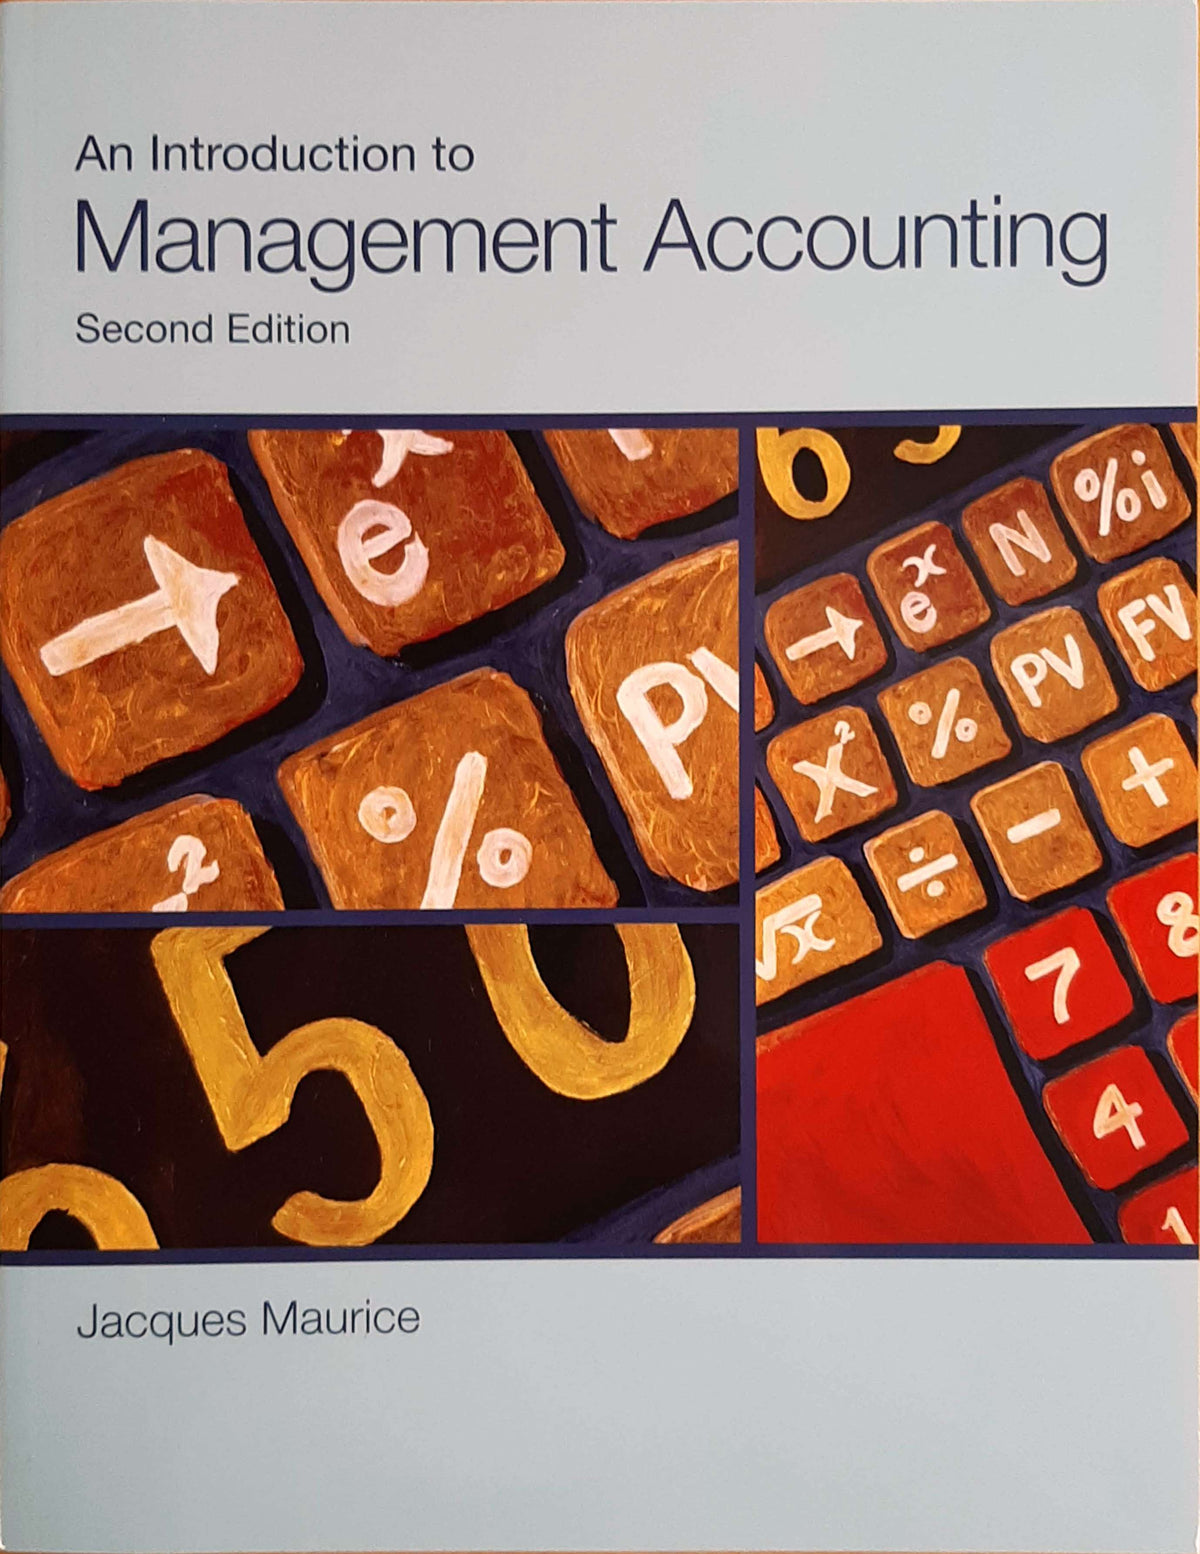 An Introduction to Management Accounting (new)